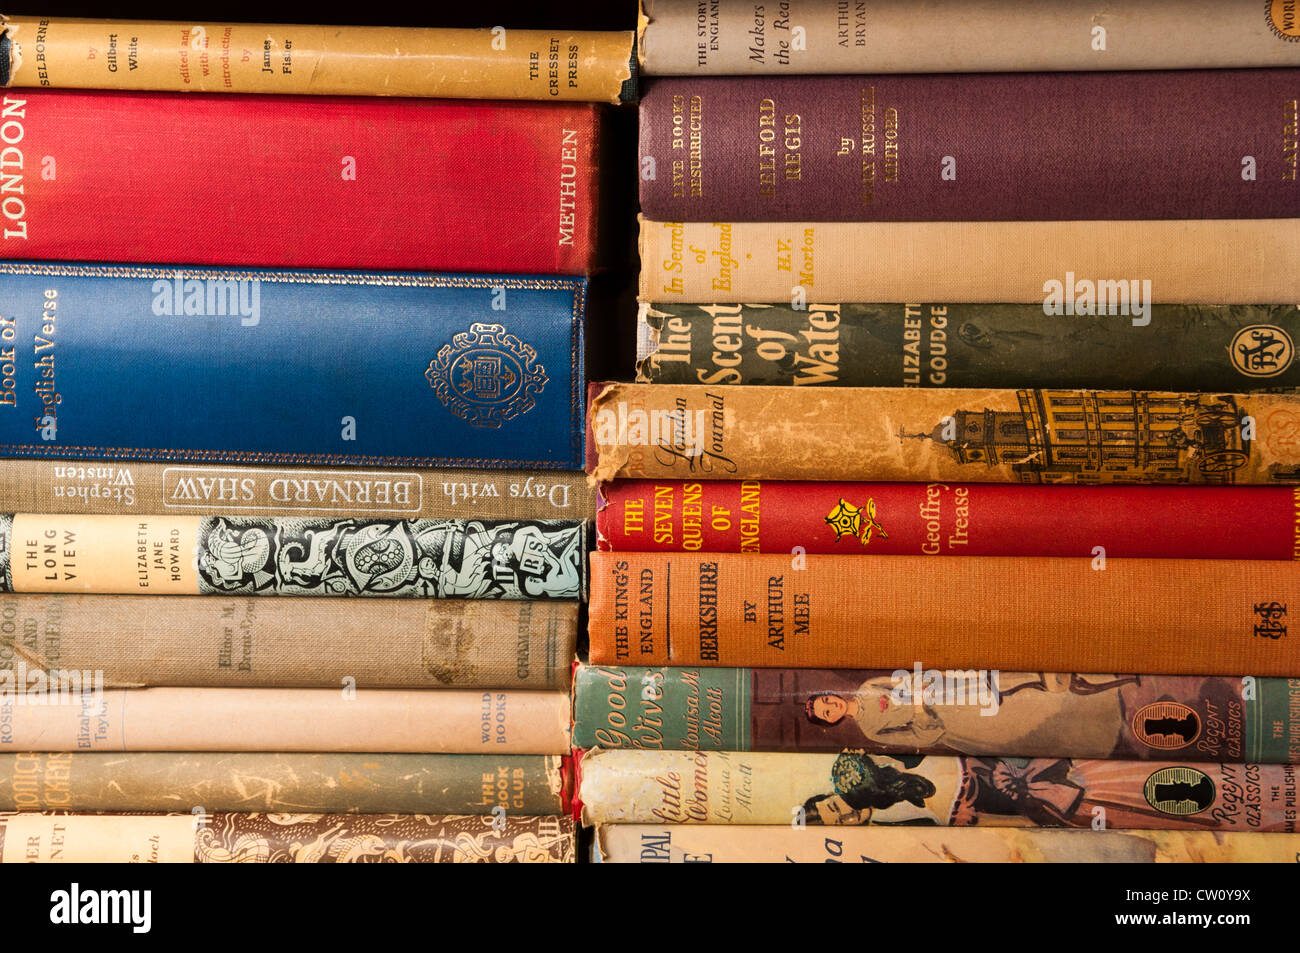 A pile of old books Stock Photo